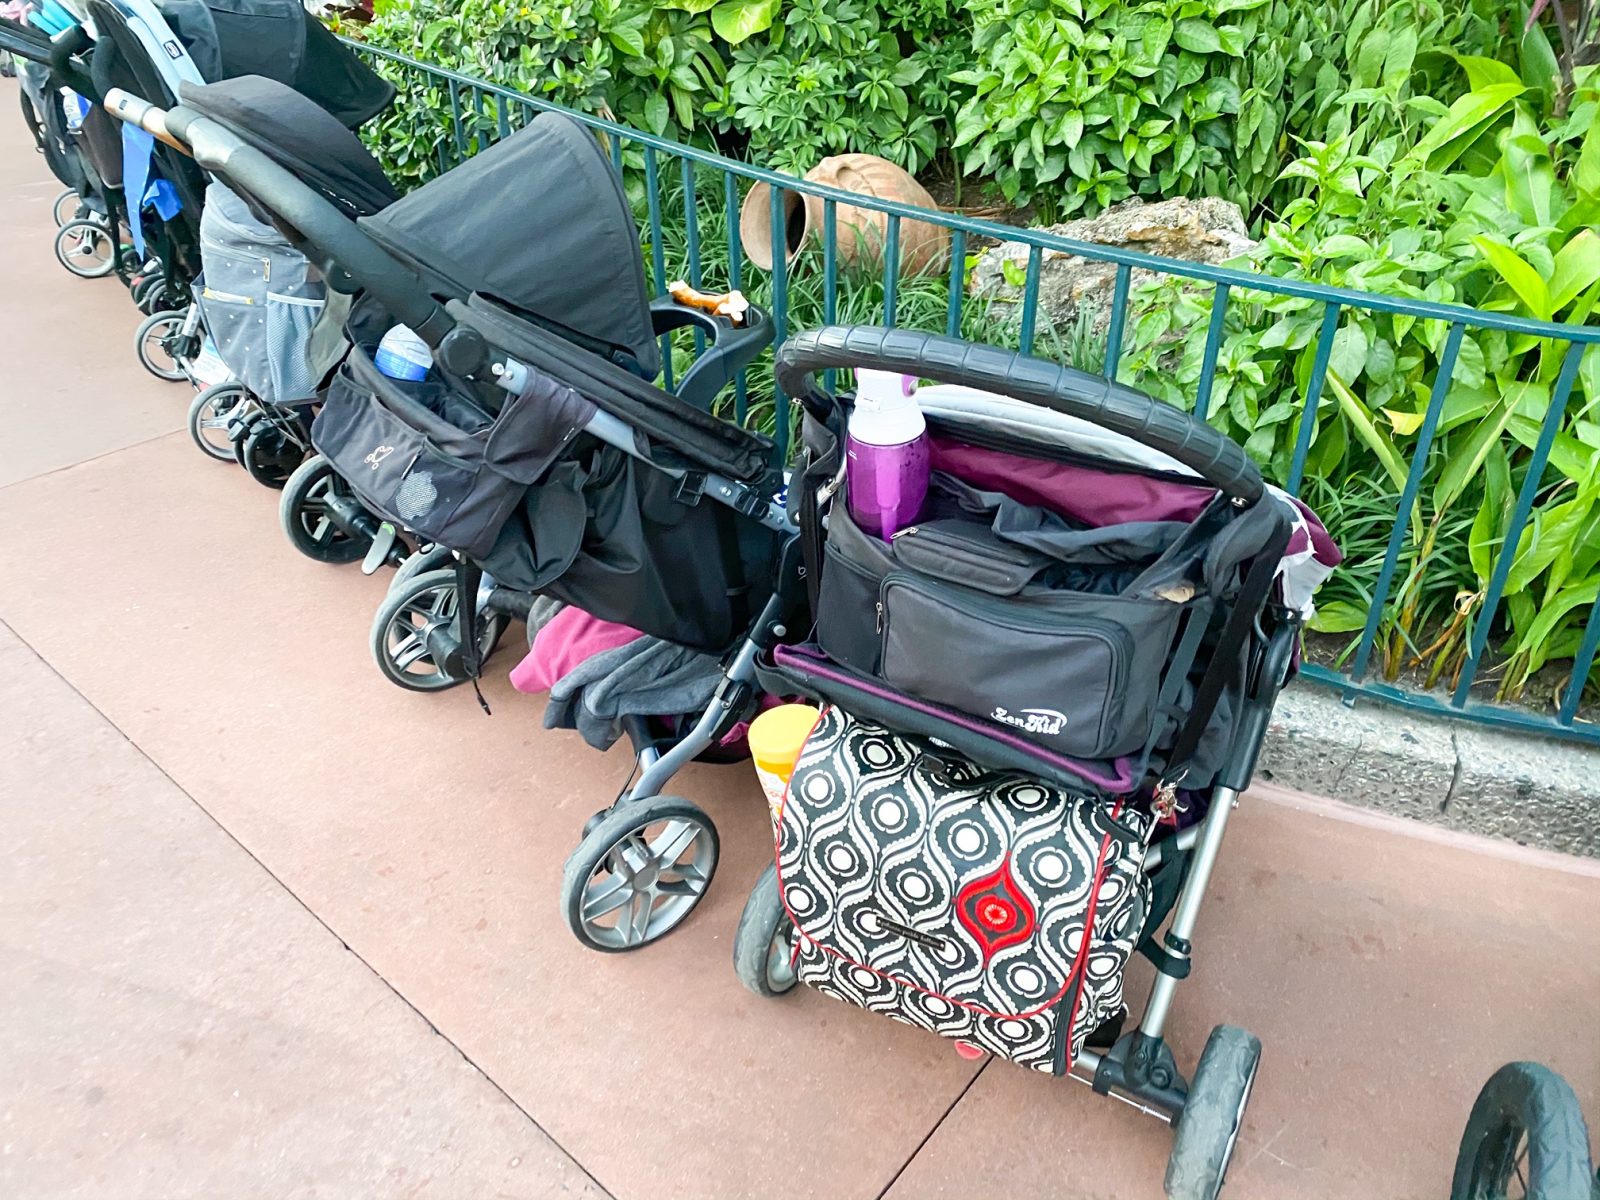 Strollers at Disney are lined up on the sides to be out of the way while guests are on rides, eating, or at shows.